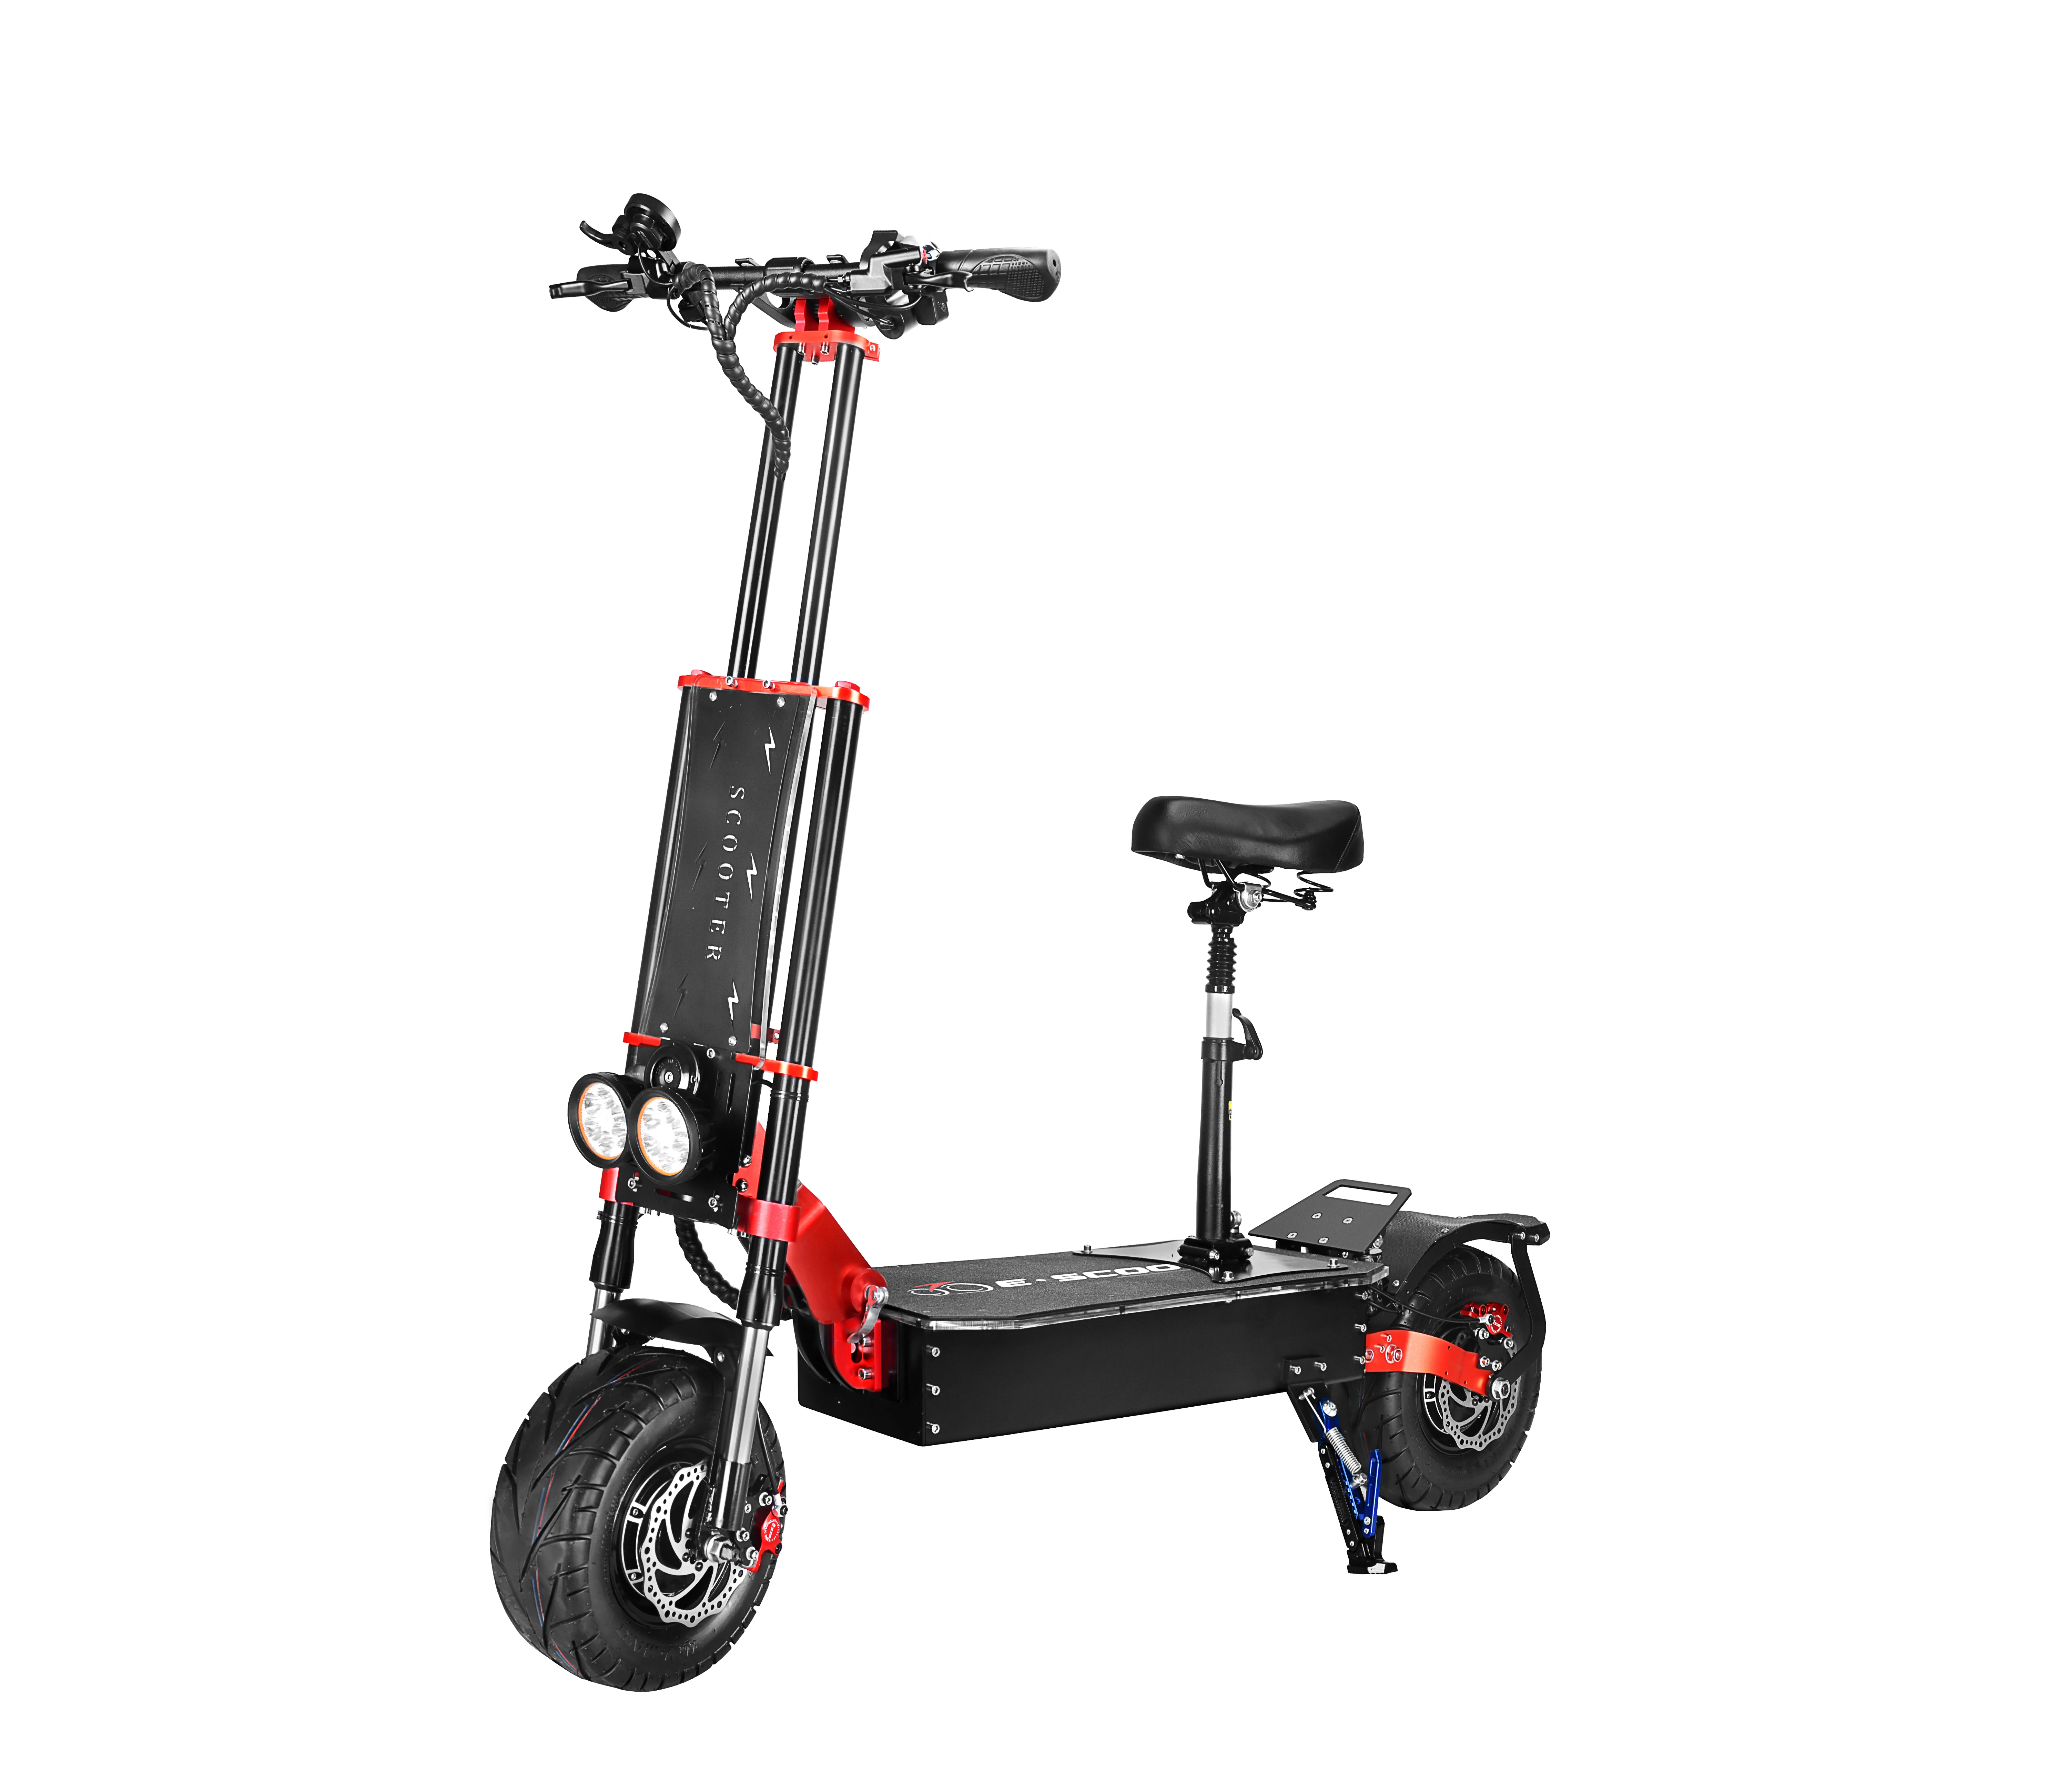 

S4 13 inch on road tire 43AH battery 5600W dual drive engine high speed off-road electric scooter folding bike adult